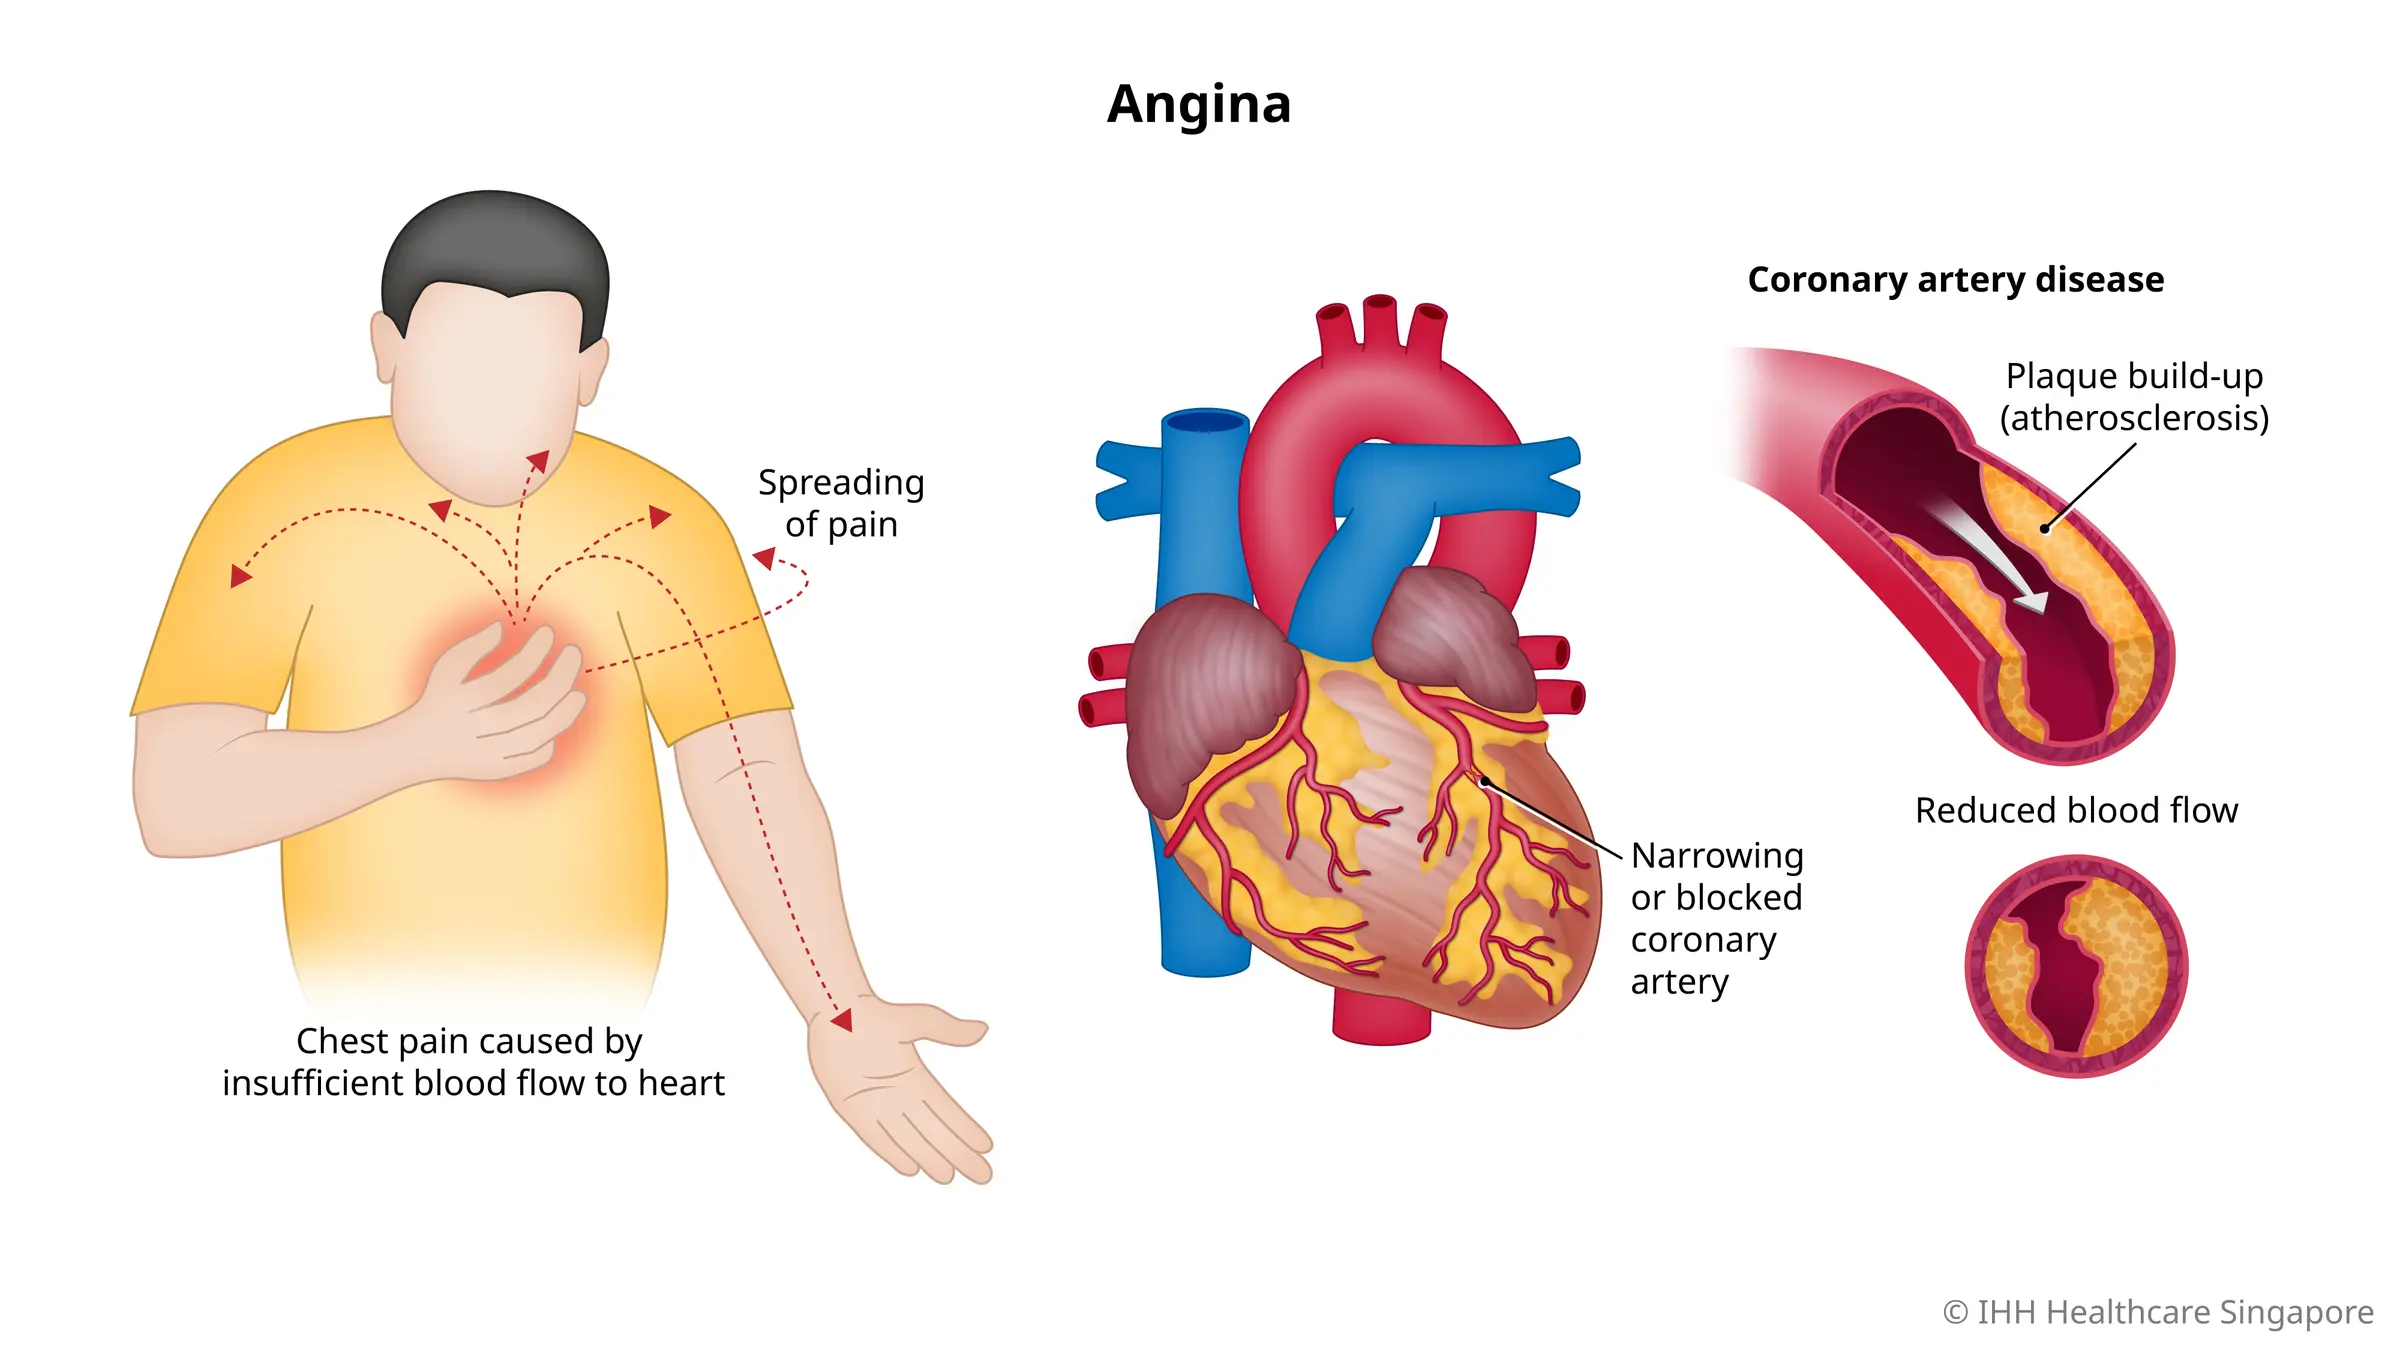 Angina (chest pain) occurs when there is insufficient blood flow to the heart due to narrowed or blocked coronary arteries.